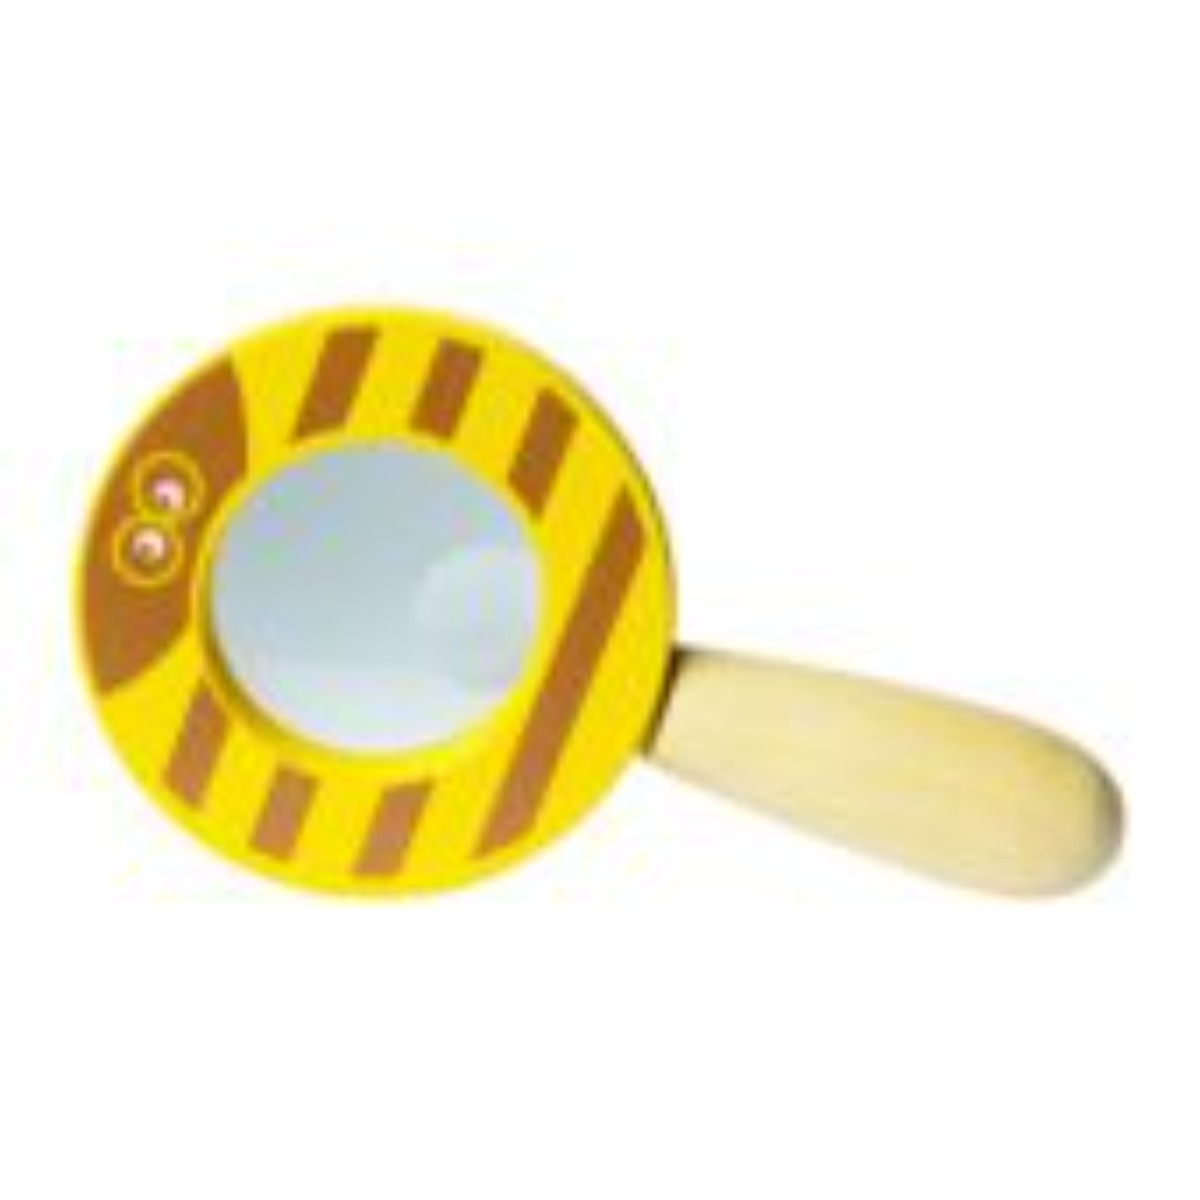 NATURAL DISCOVERY MAGNIFYING GLASS